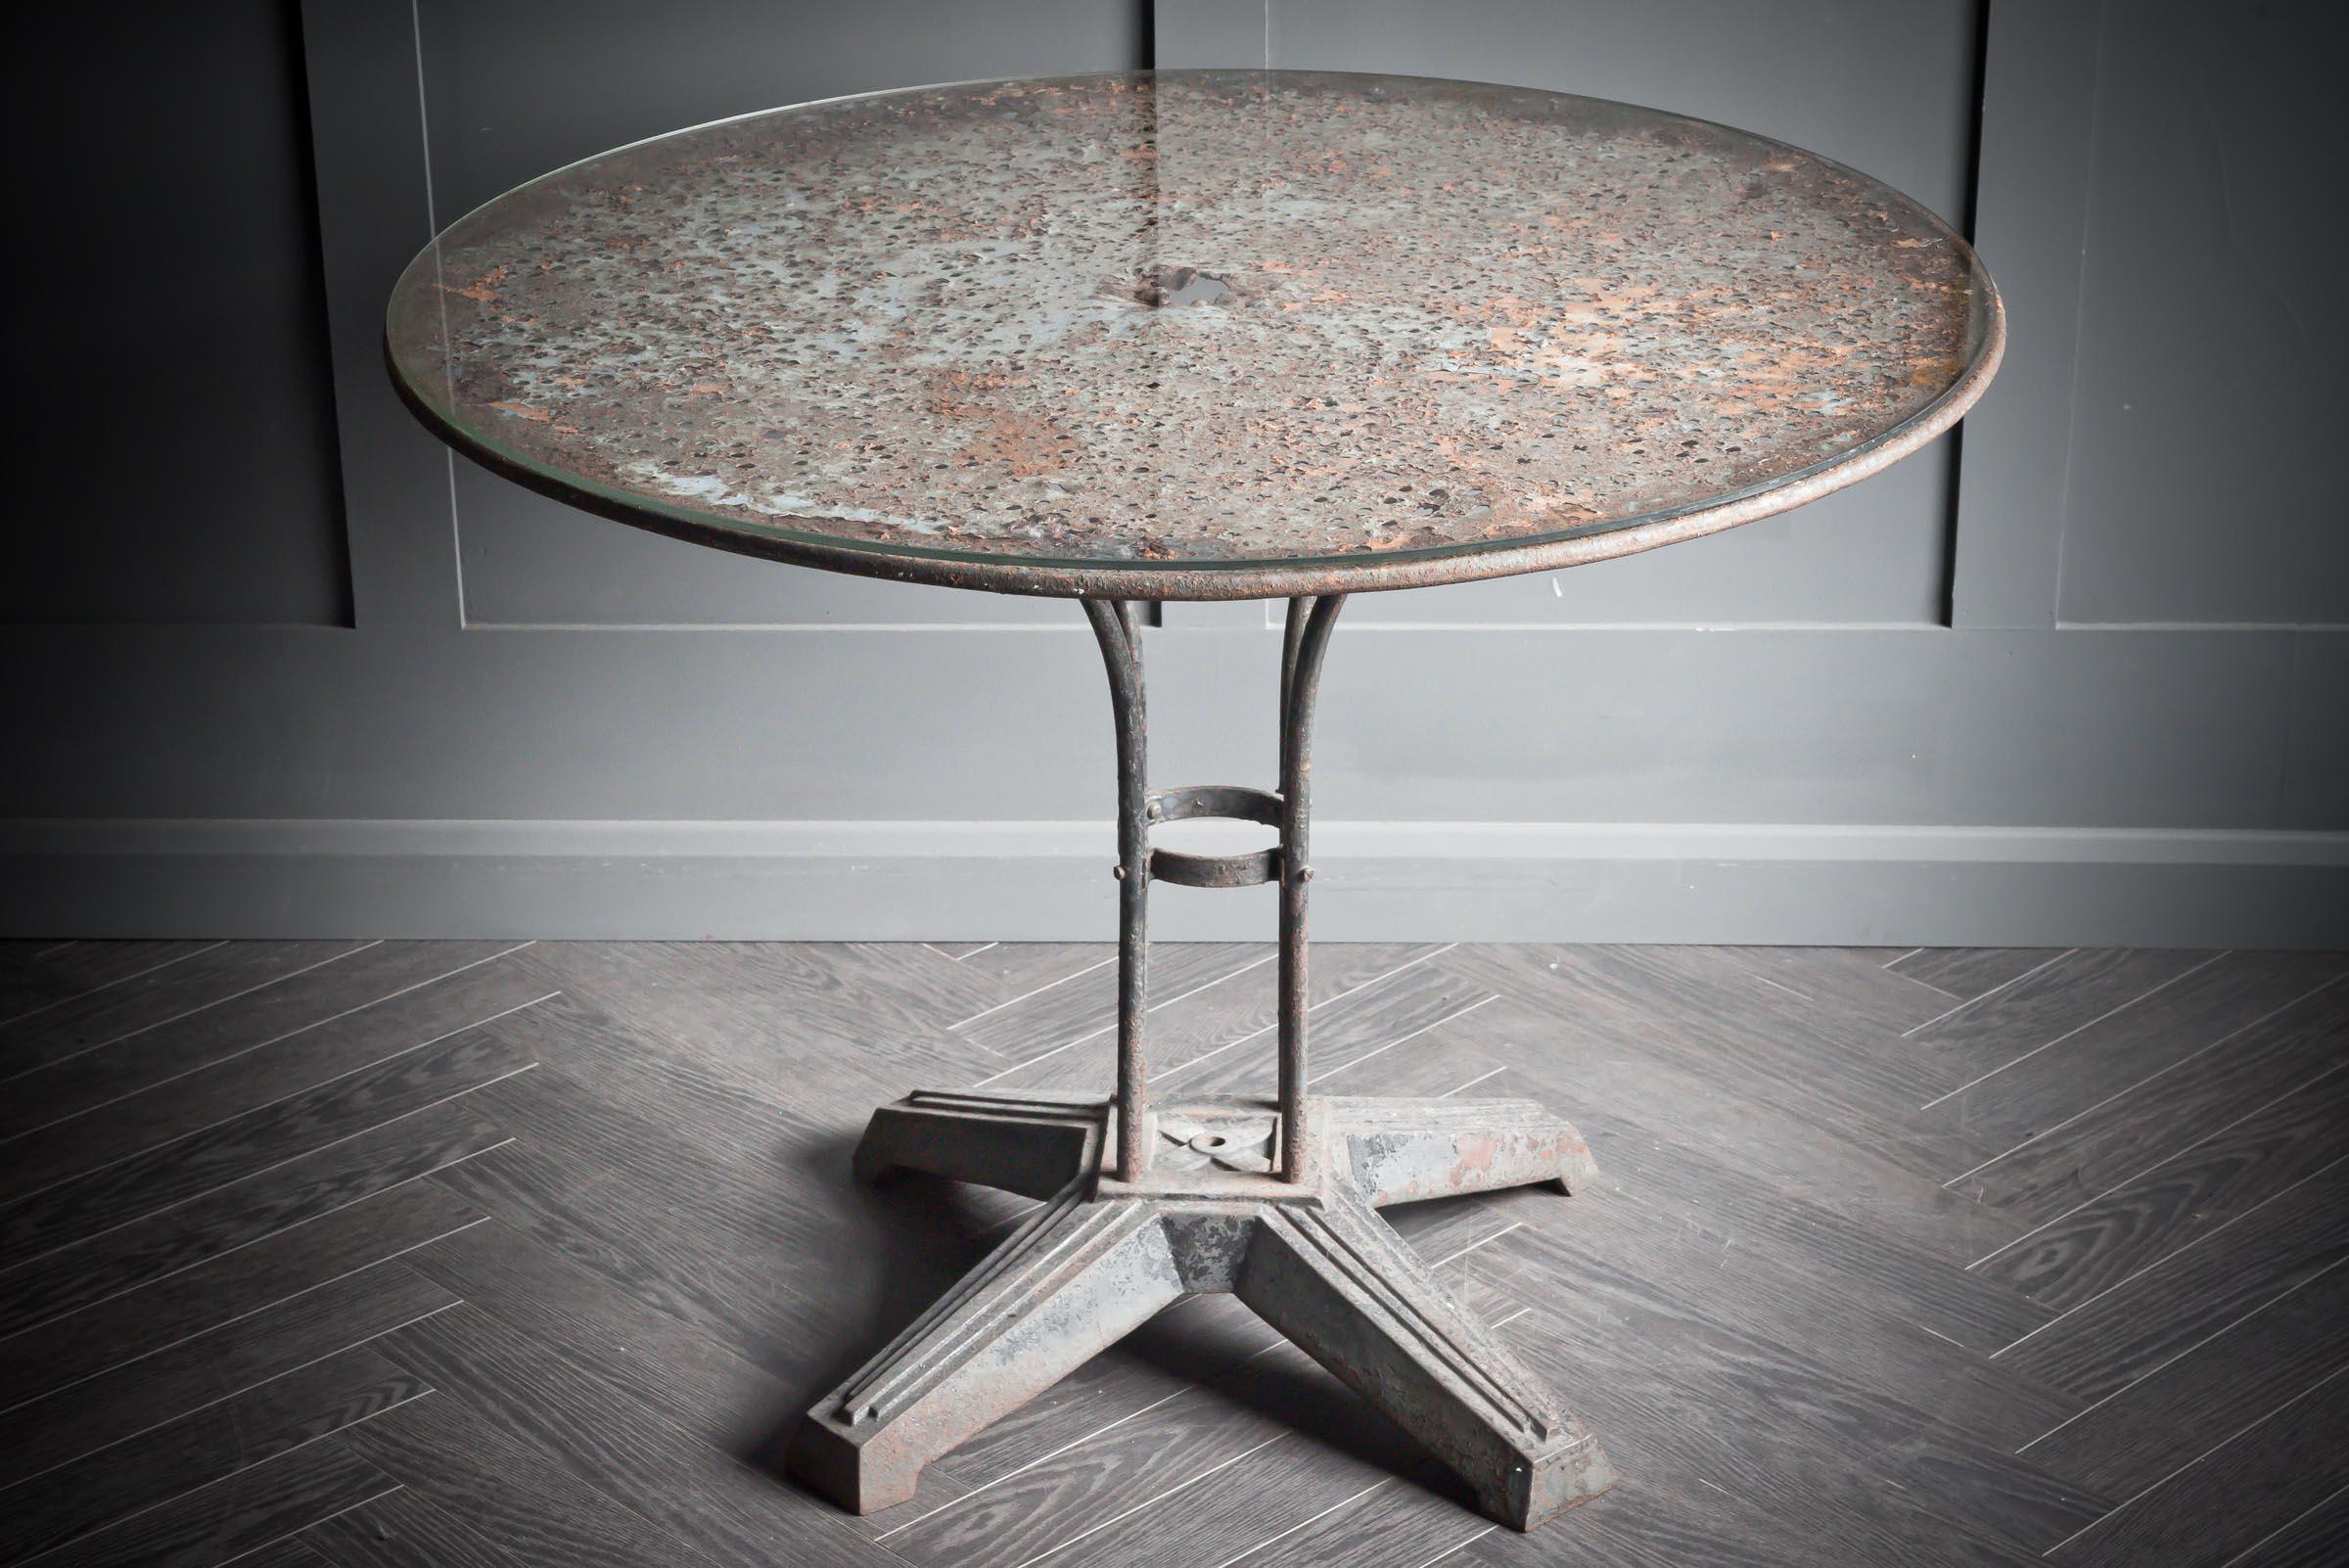 Round bistro table with glass top originating from France.